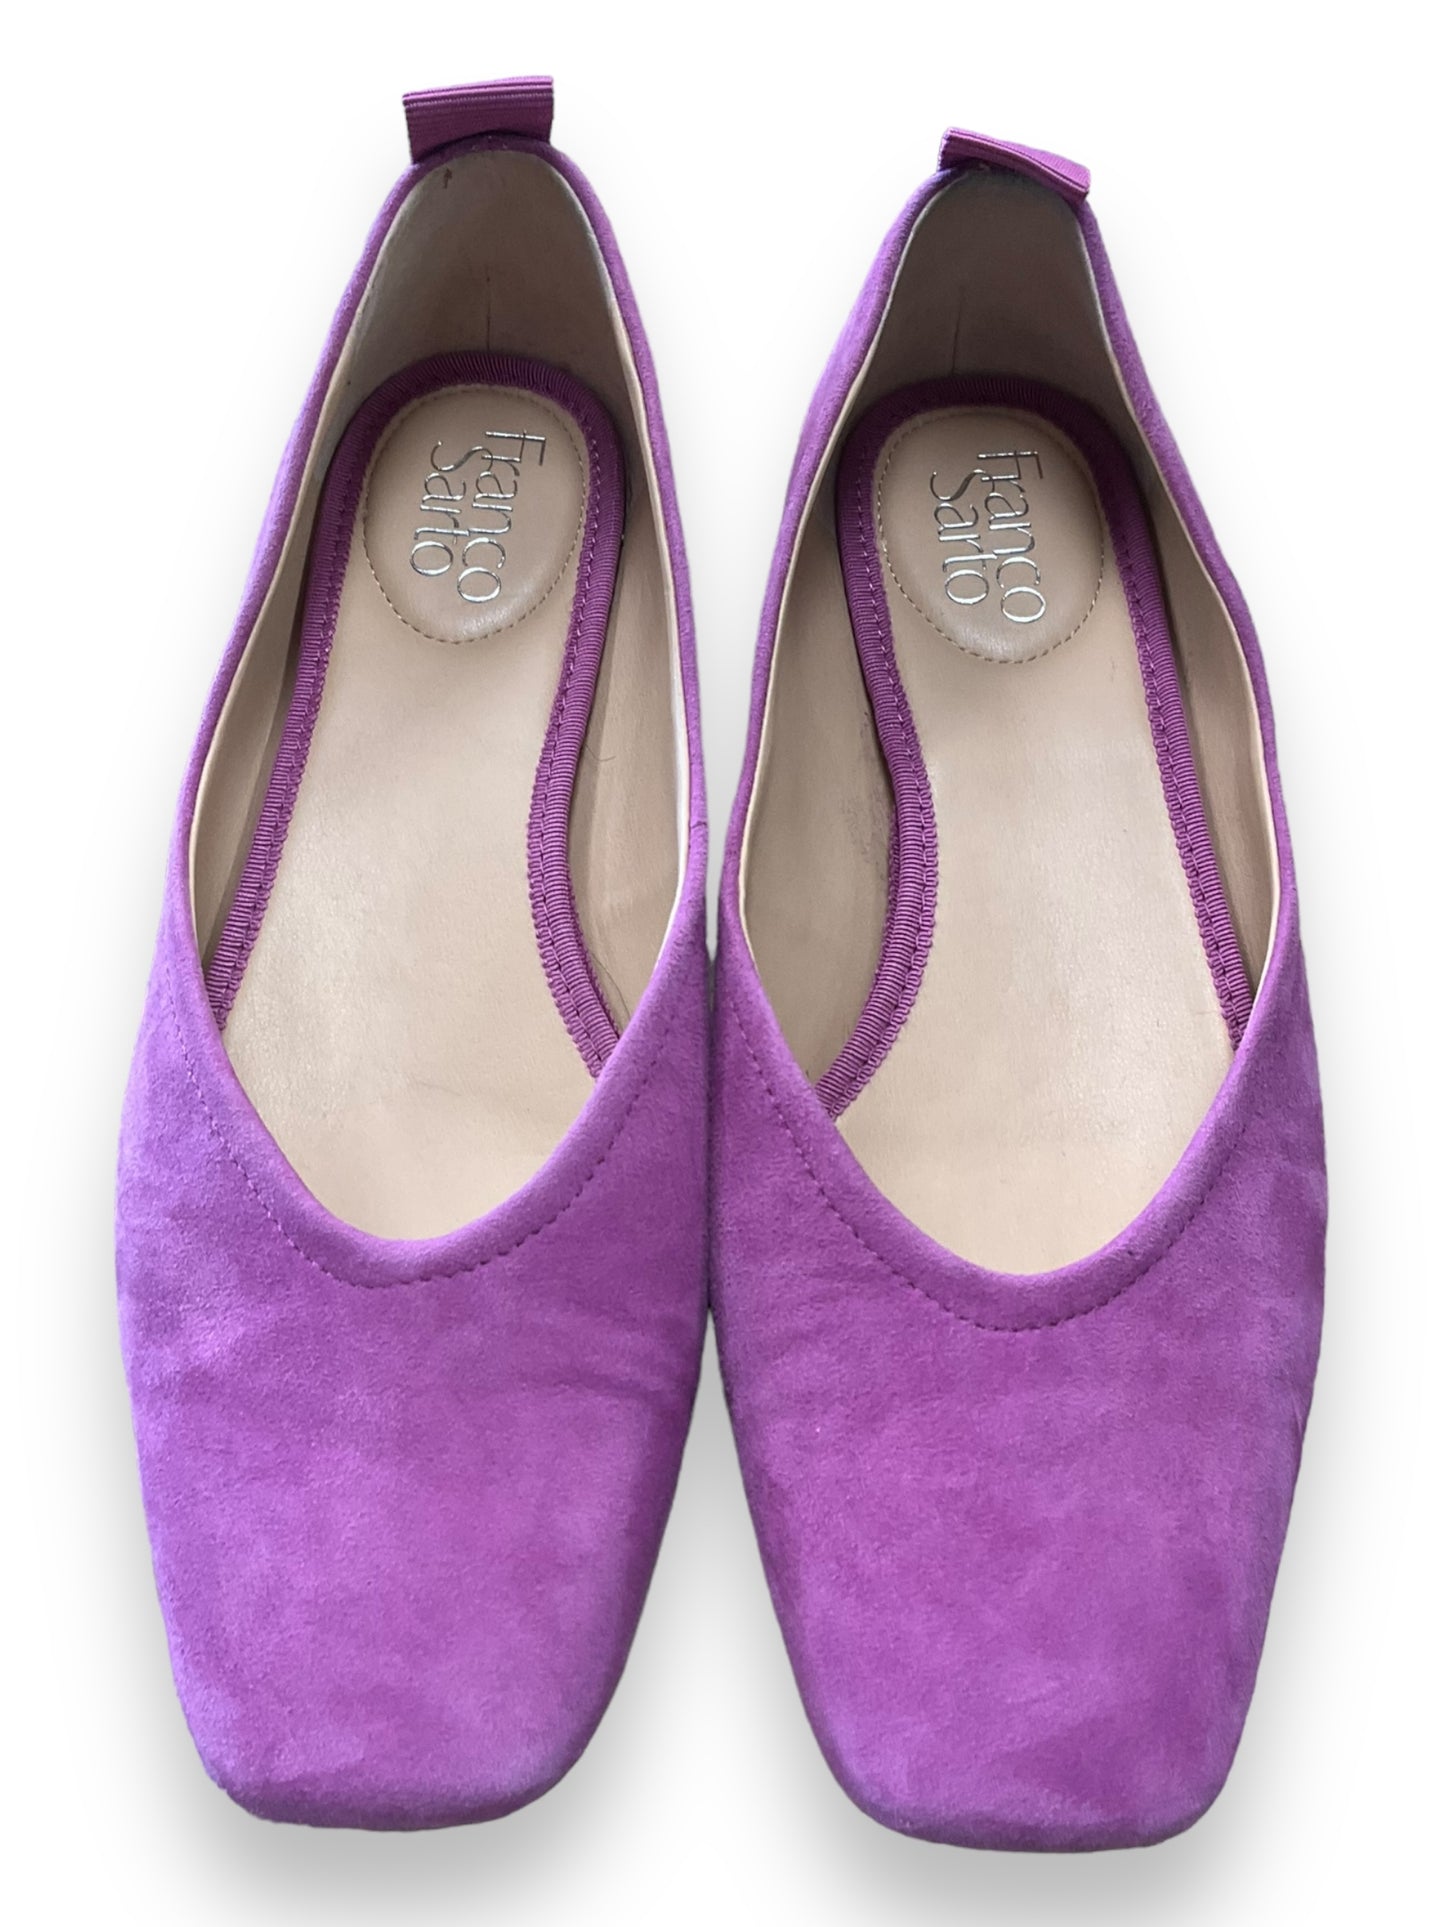 Shoes Flats Ballet By Franco Sarto  Size: 8.5